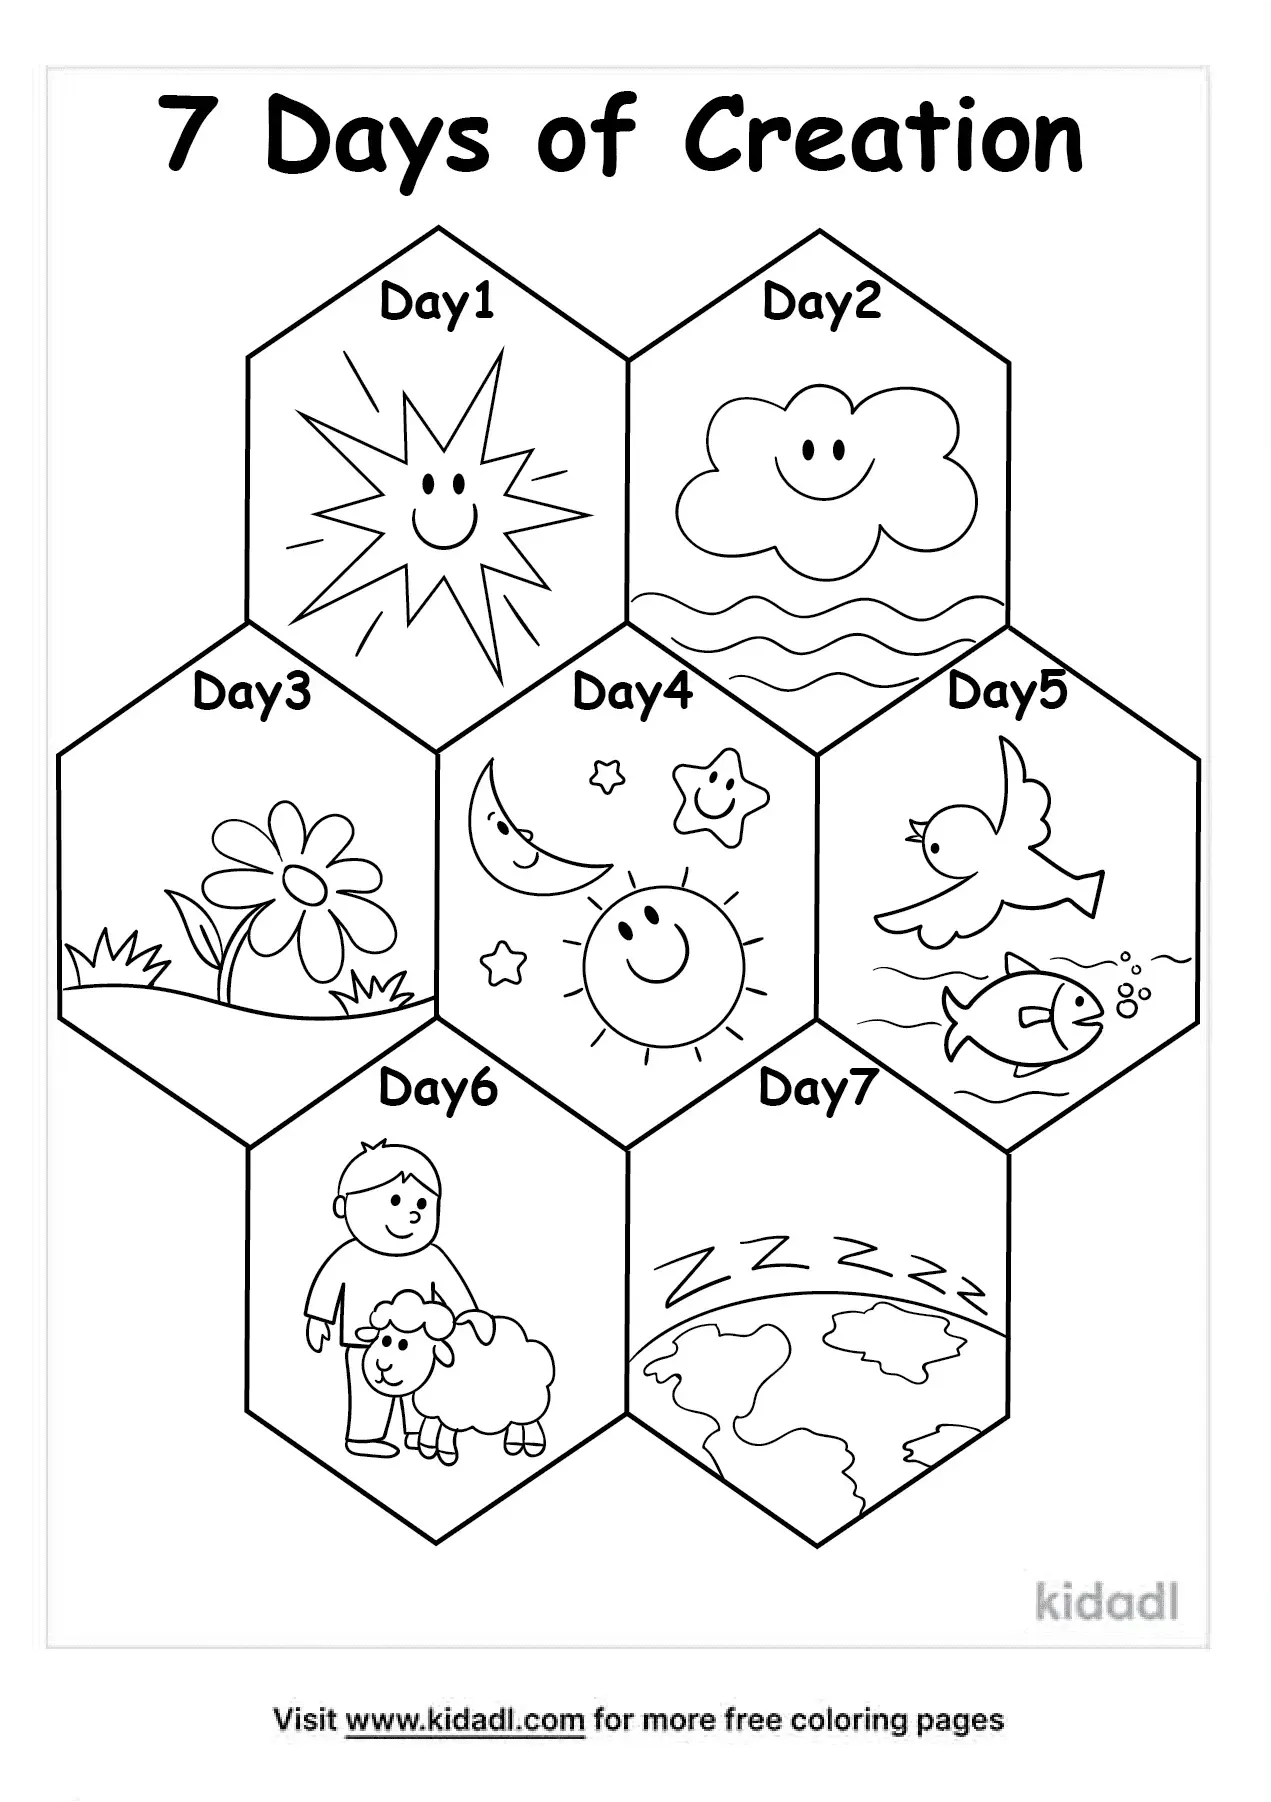 40 Free Printable 7 Days Of Creation Coloring Pages C - vrogue.co